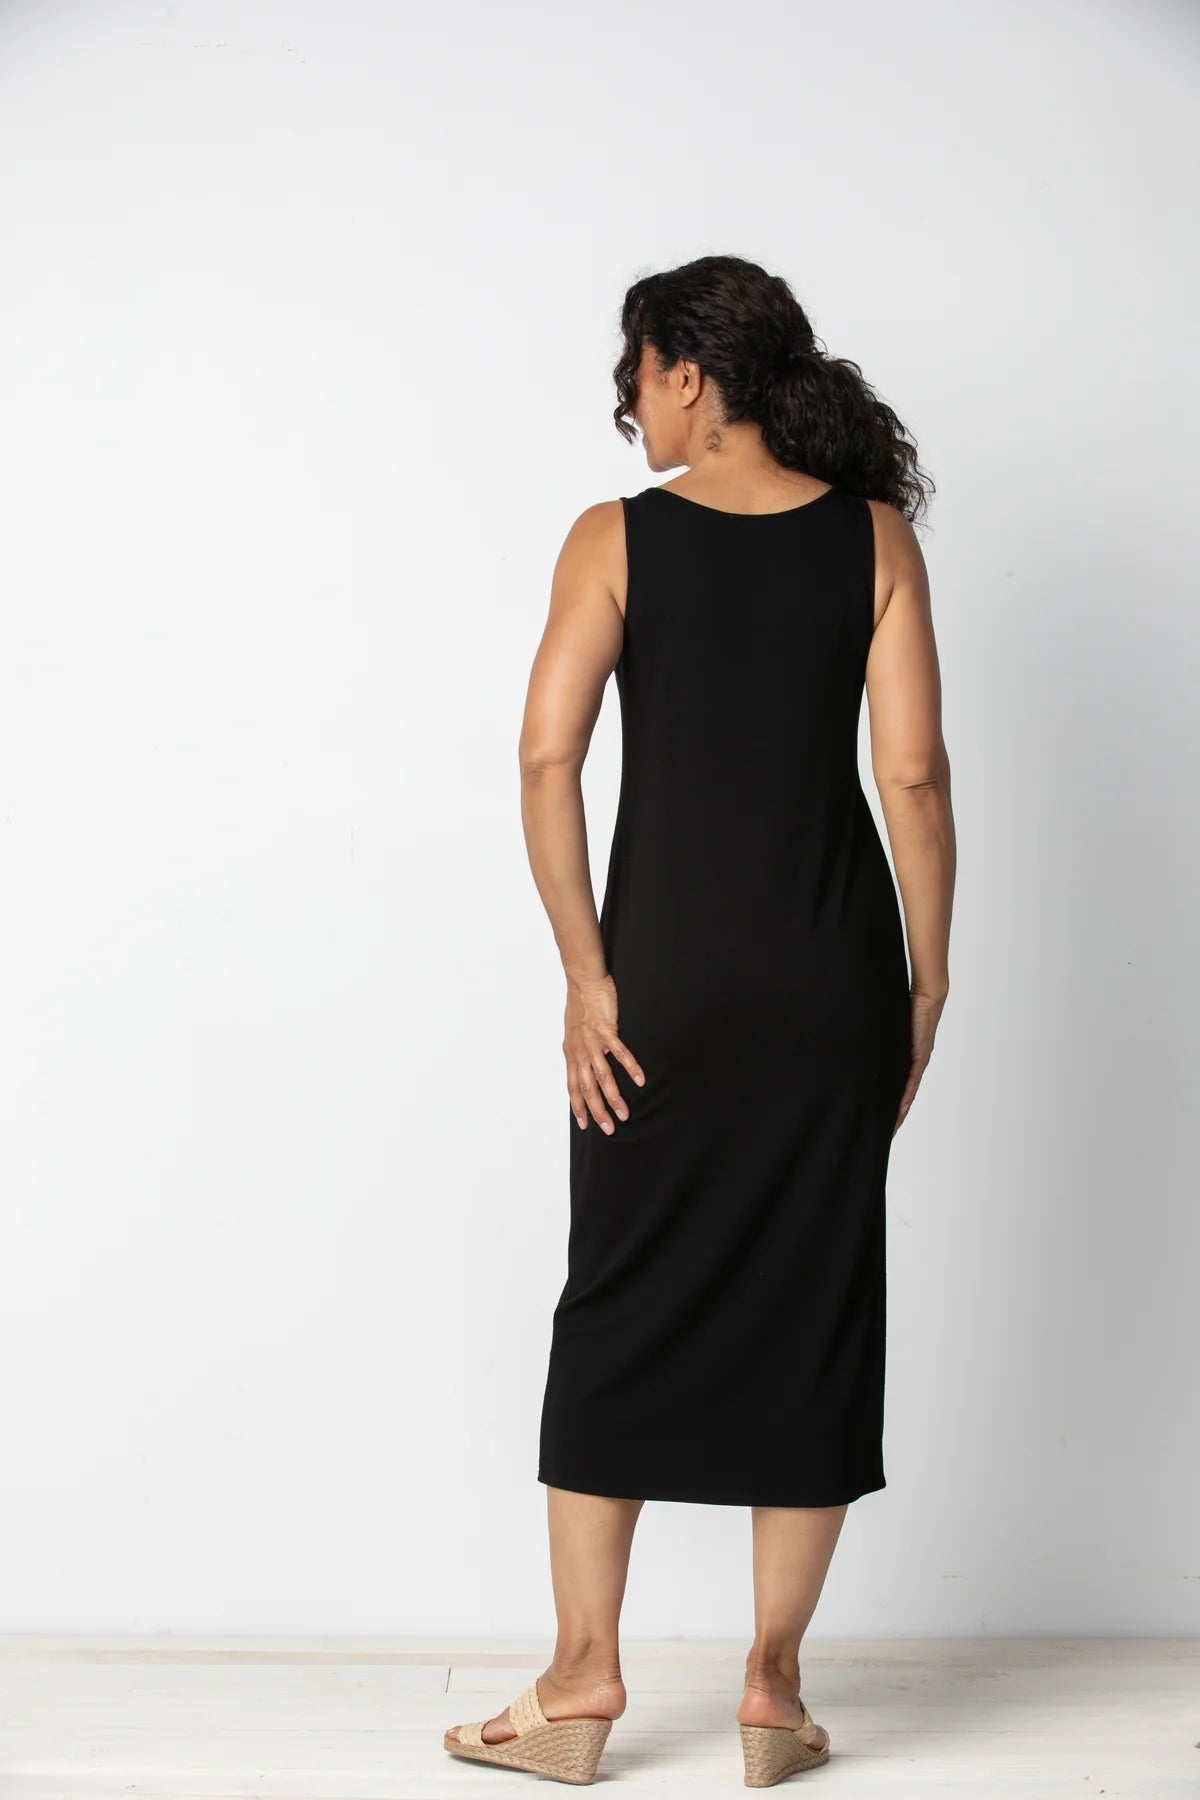 Smiling woman standing in a Habitat Sleeveless Black Everything Dress against a white background.